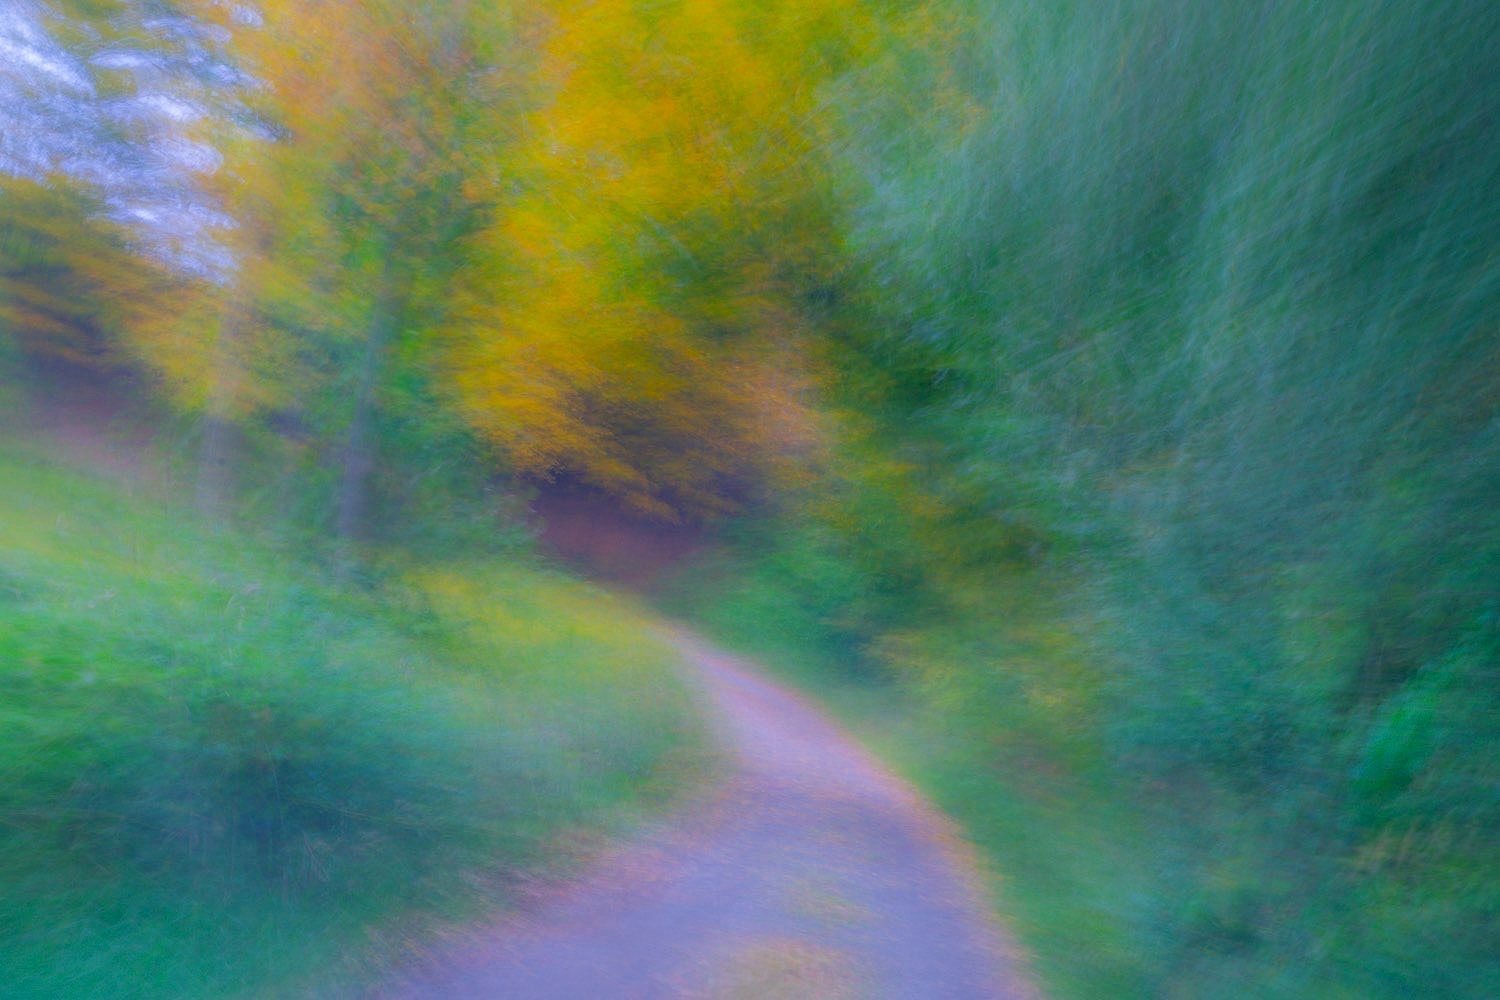 Make+your+own+path+down+a+country+road.+This+painterly+photograph+was+created+by+johnstuatrstudio-compress.jpg